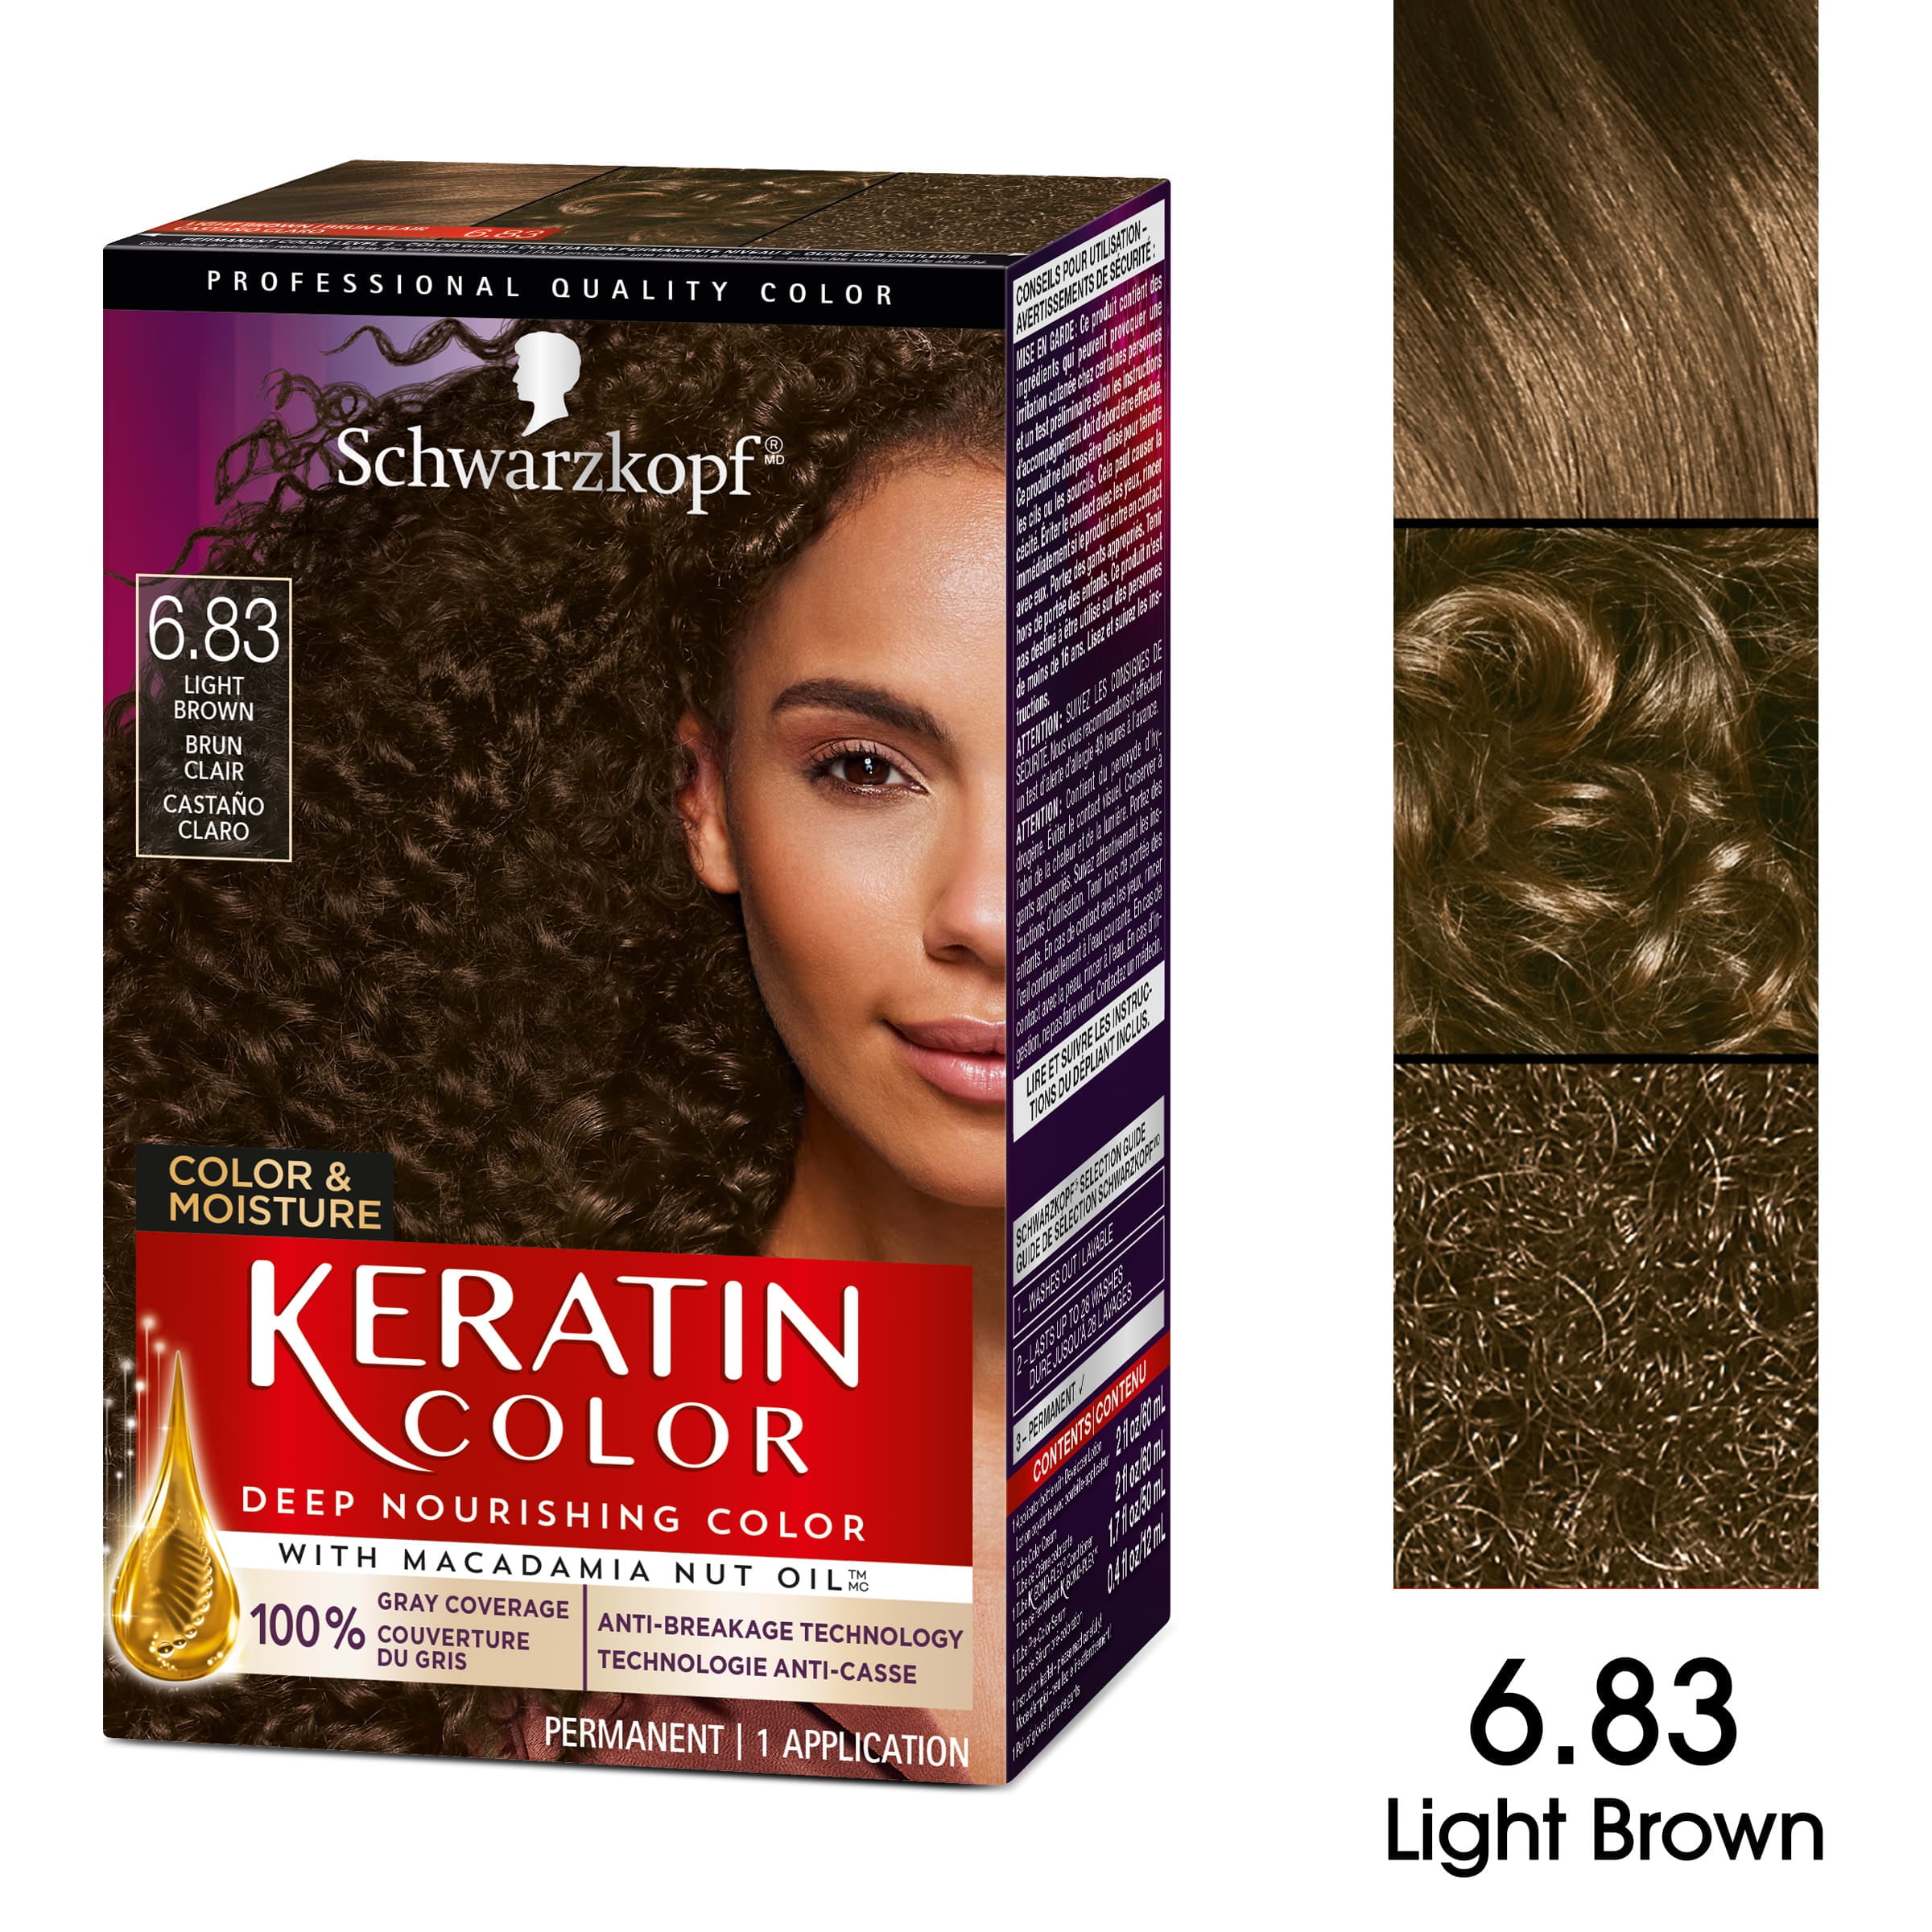 Cuticolor Hair Coloring Cream Dark Brown, 60 gm Price, Uses, Side Effects,  Composition - Apollo Pharmacy